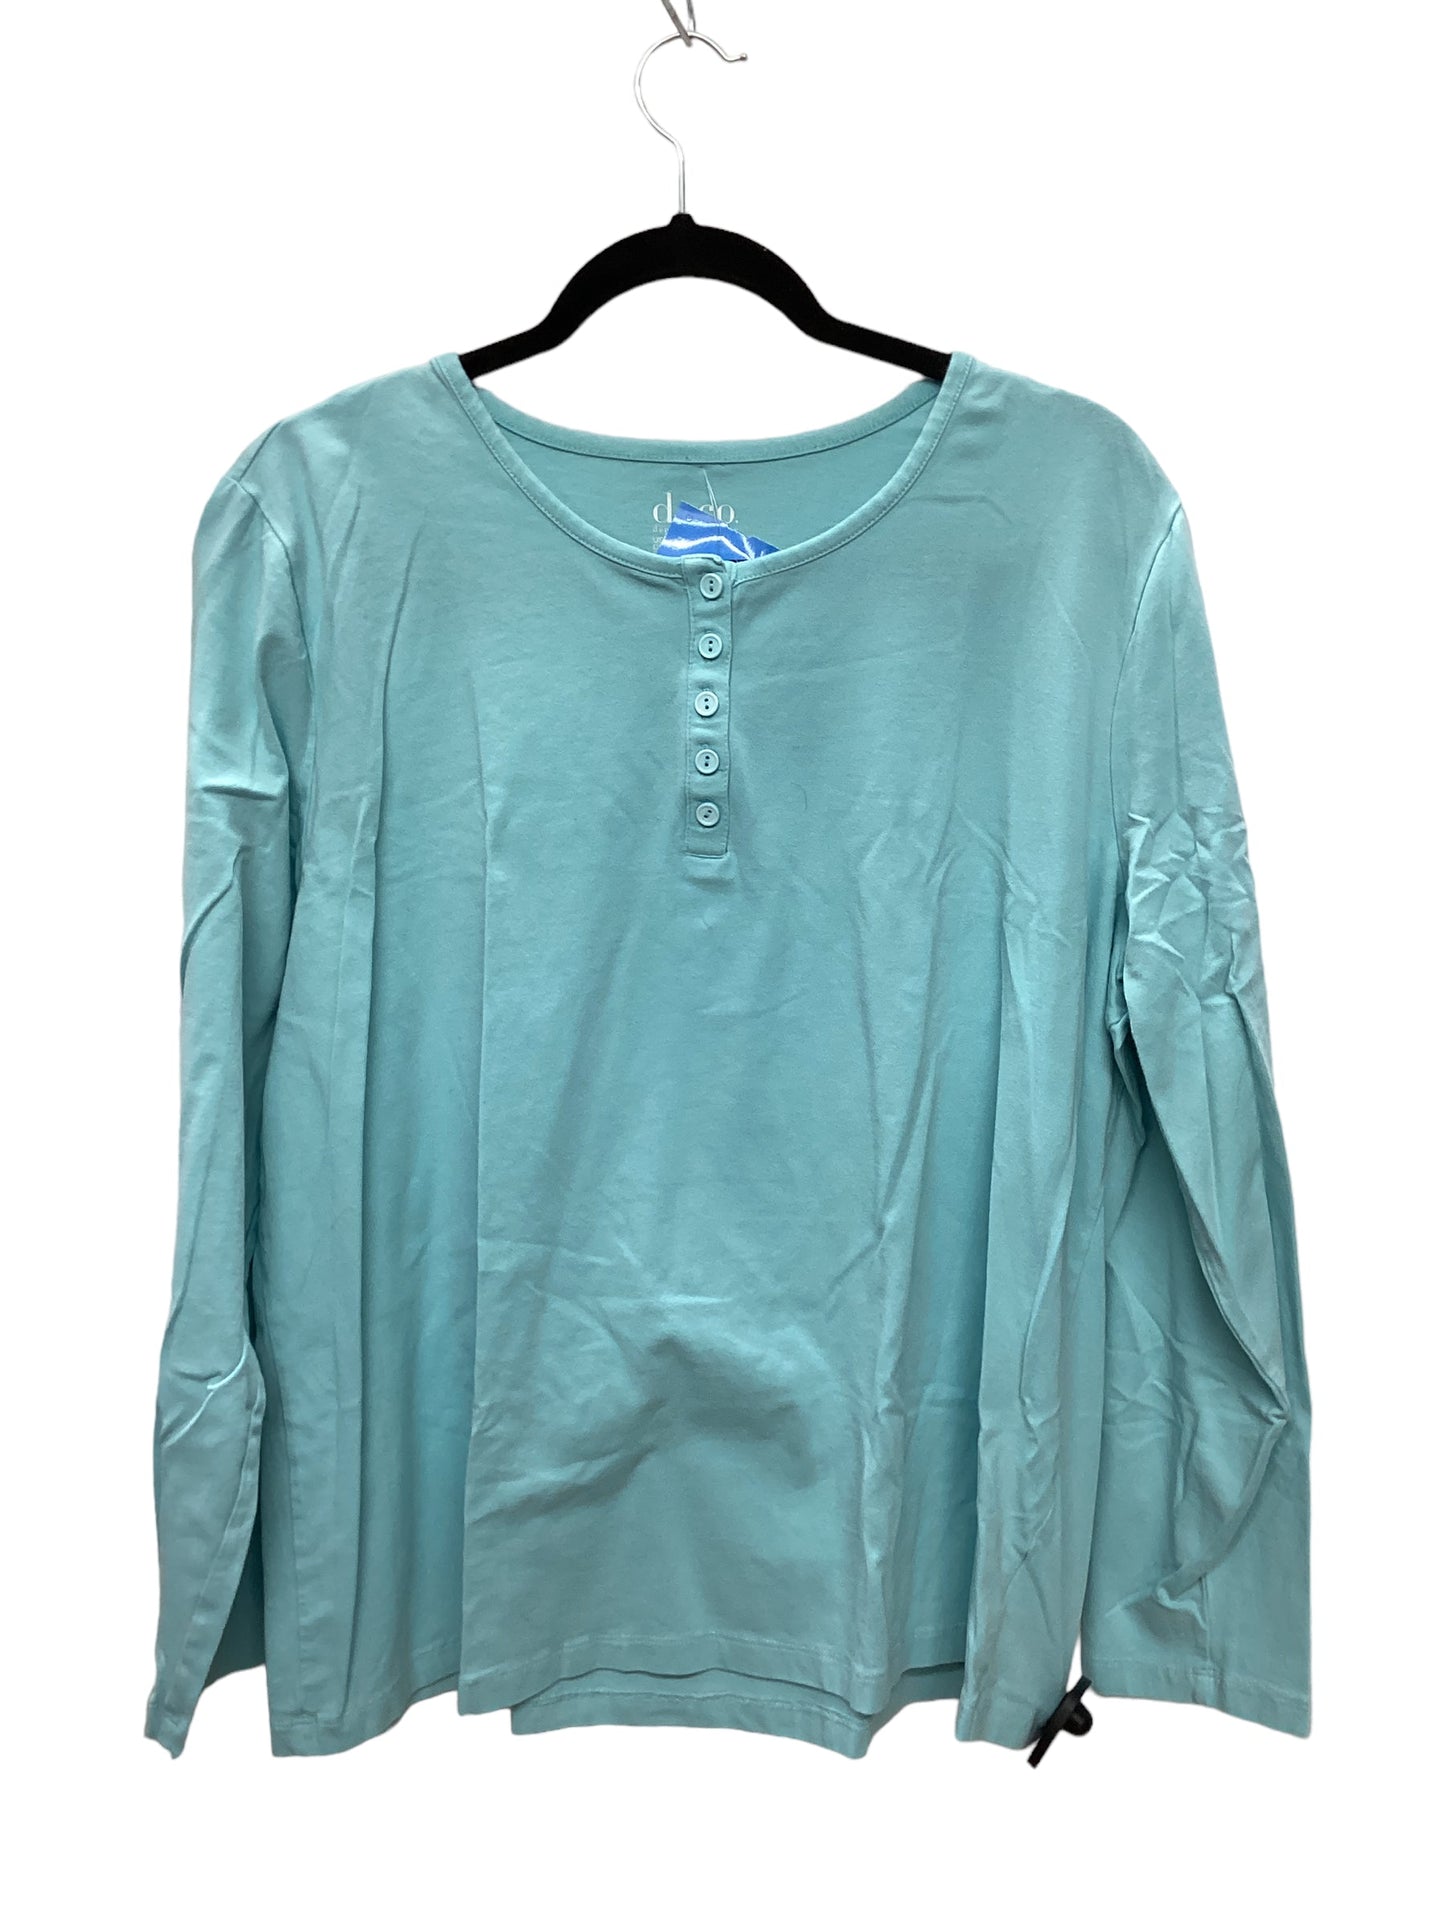 Top Long Sleeve By Denim And Company  Size: L